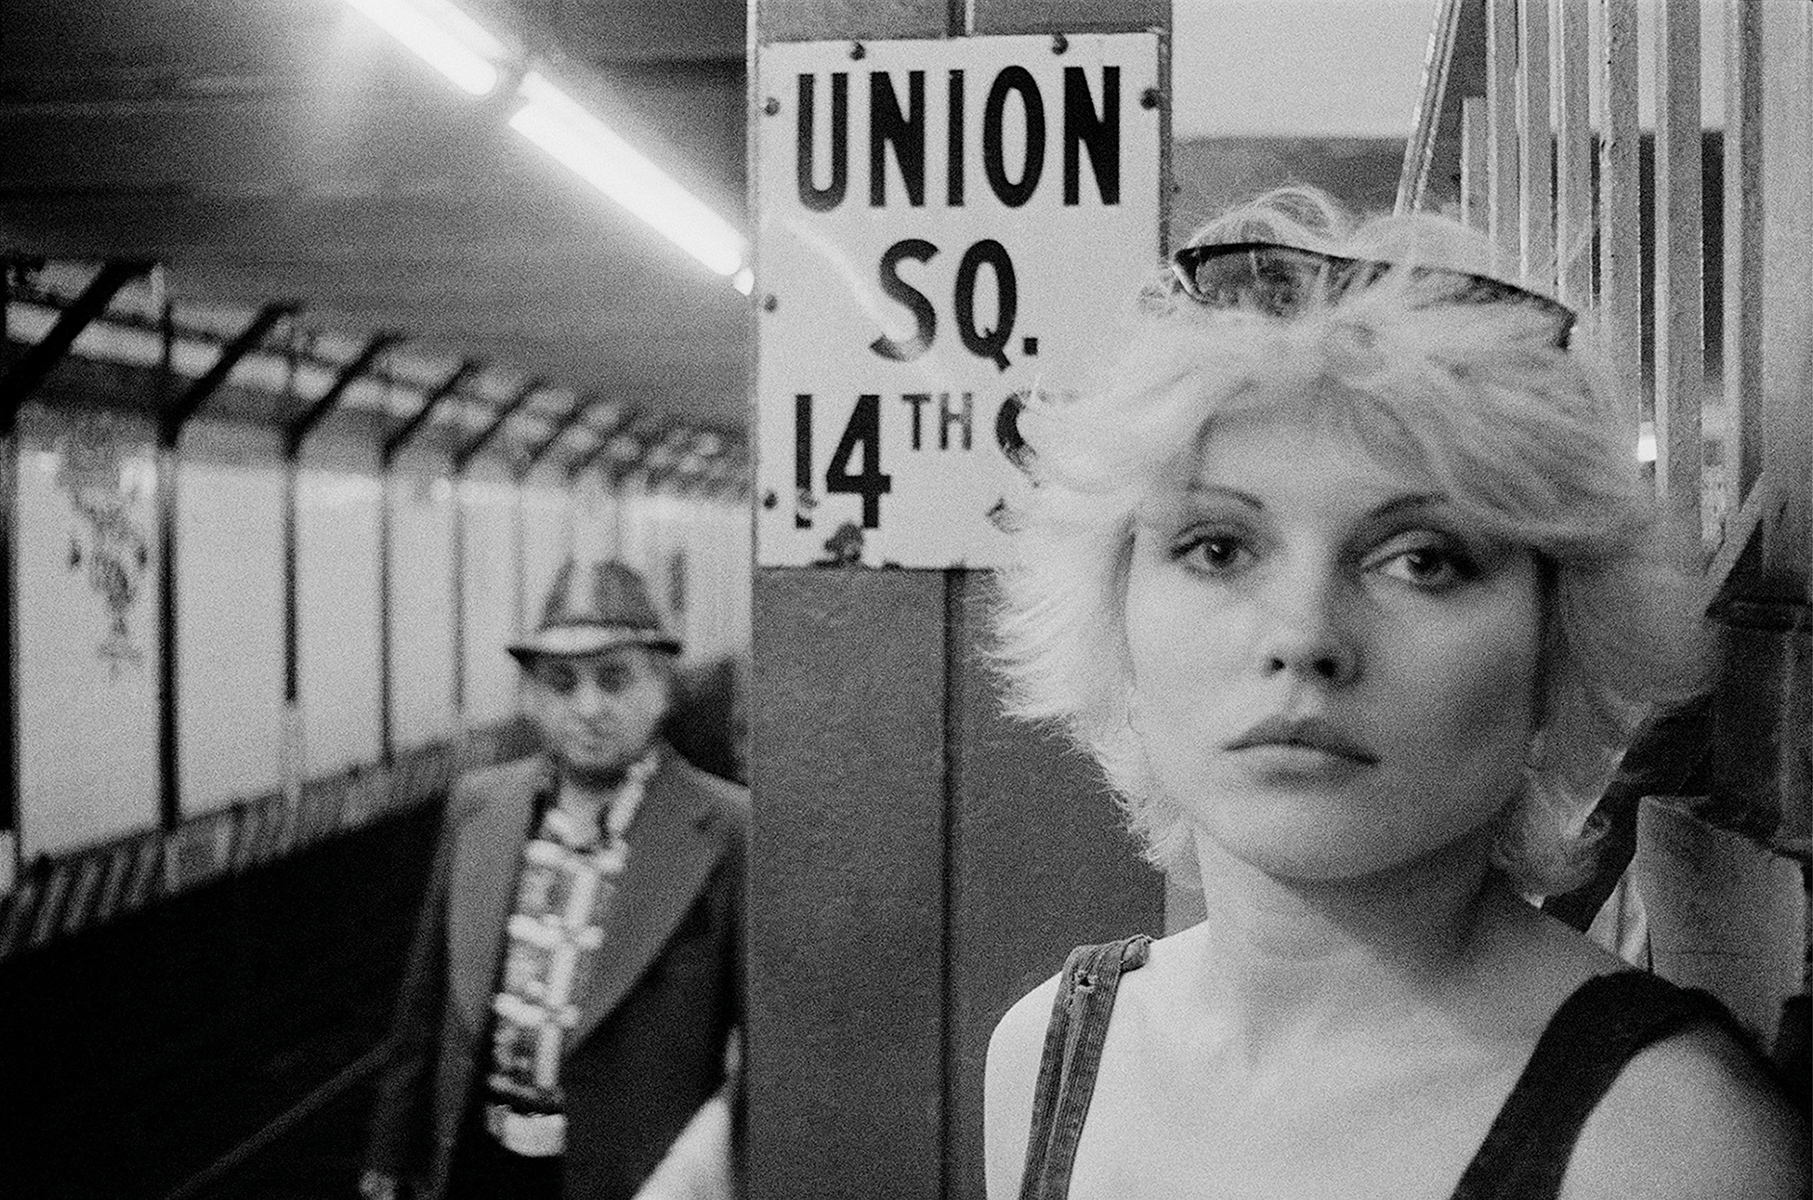 Blondie’s Chris Stein Releases Photography Book on NYC Punk Scene